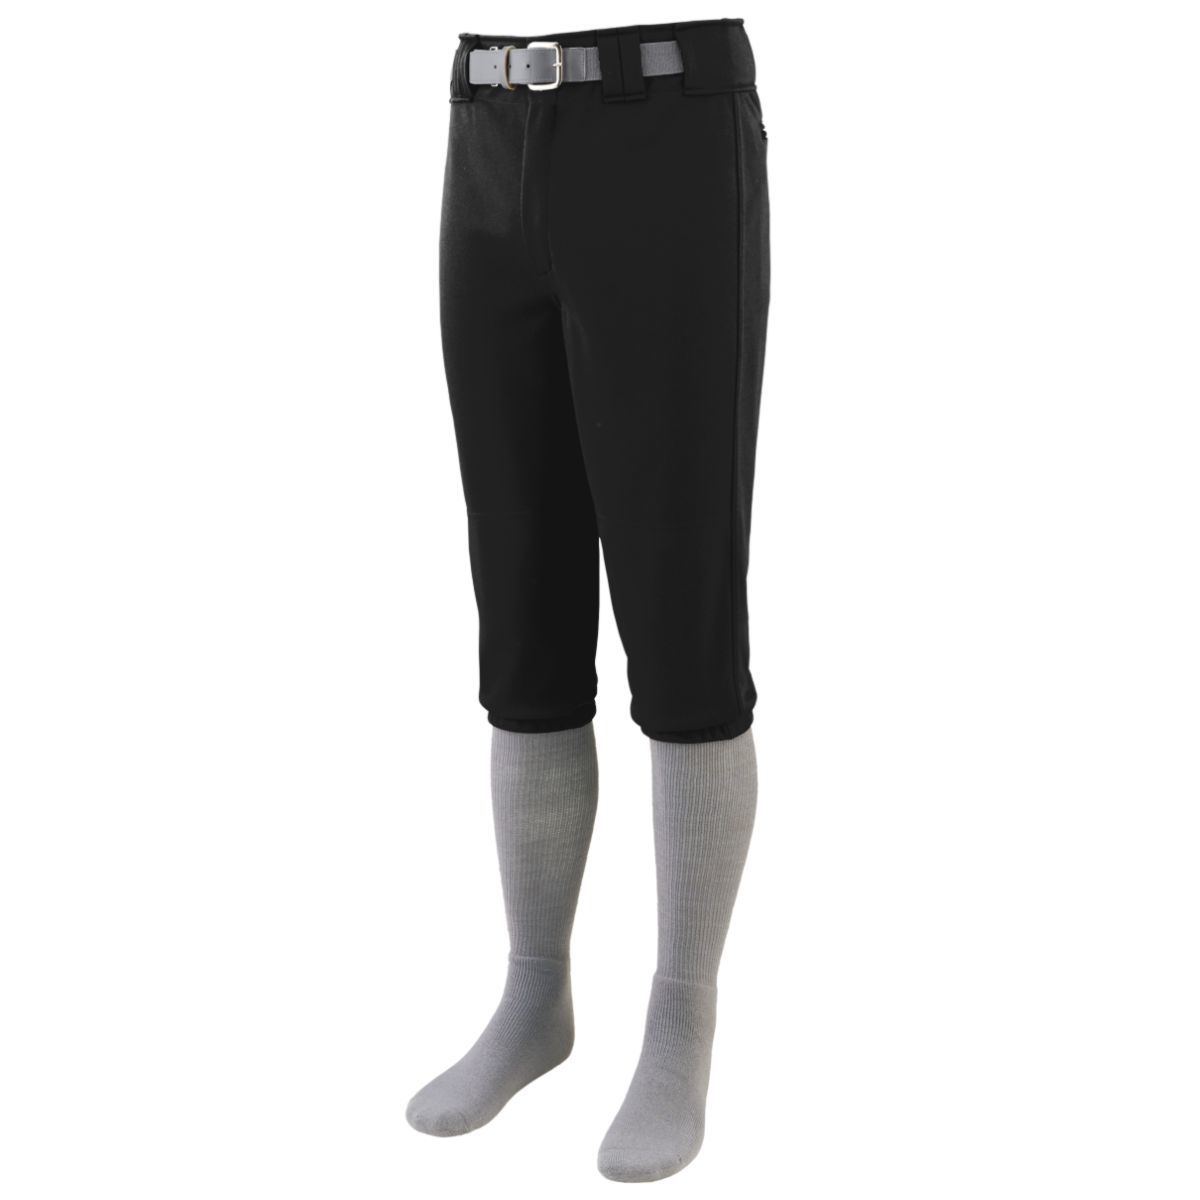 Augusta Sportswear Series Knee Length Baseball Pant in Black  -Part of the Adult, Adult-Pants, Pants, Augusta-Products, Baseball, All-Sports, All-Sports-1 product lines at KanaleyCreations.com